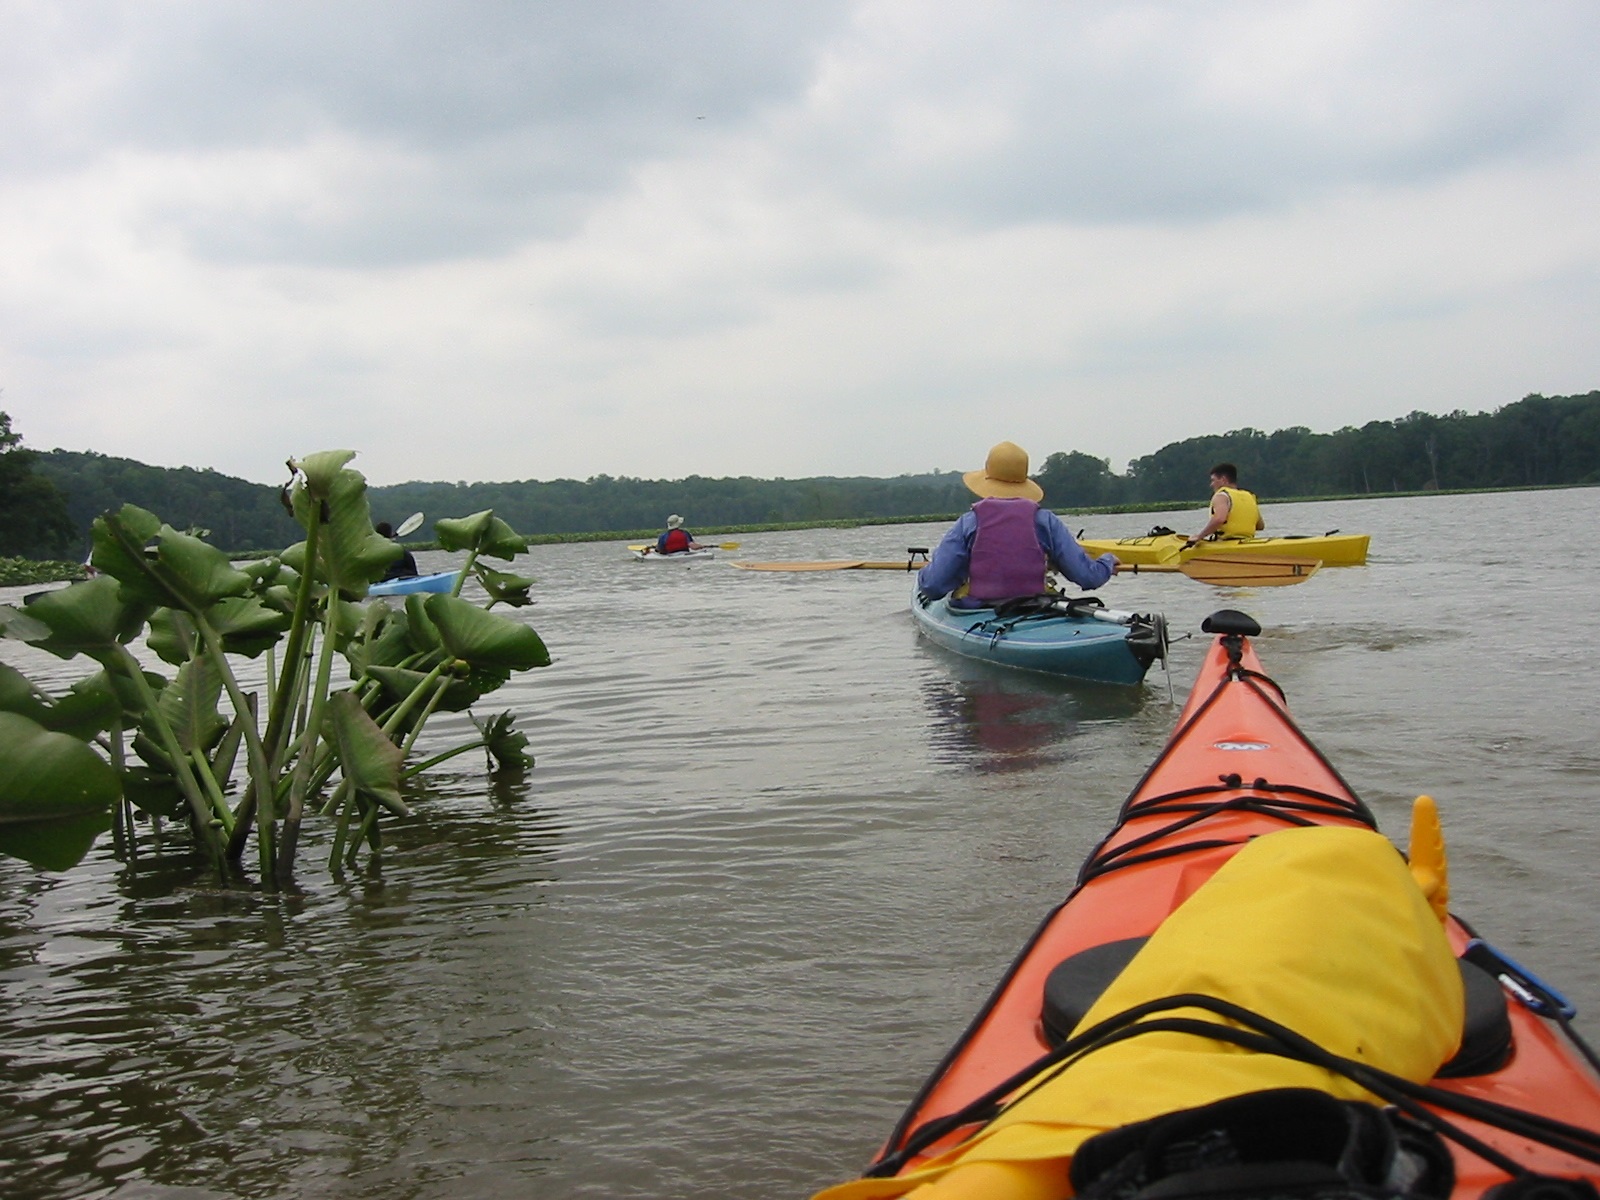 Picture taken in the Potomac River from the seat of a kayak showing additional kayakers in the front